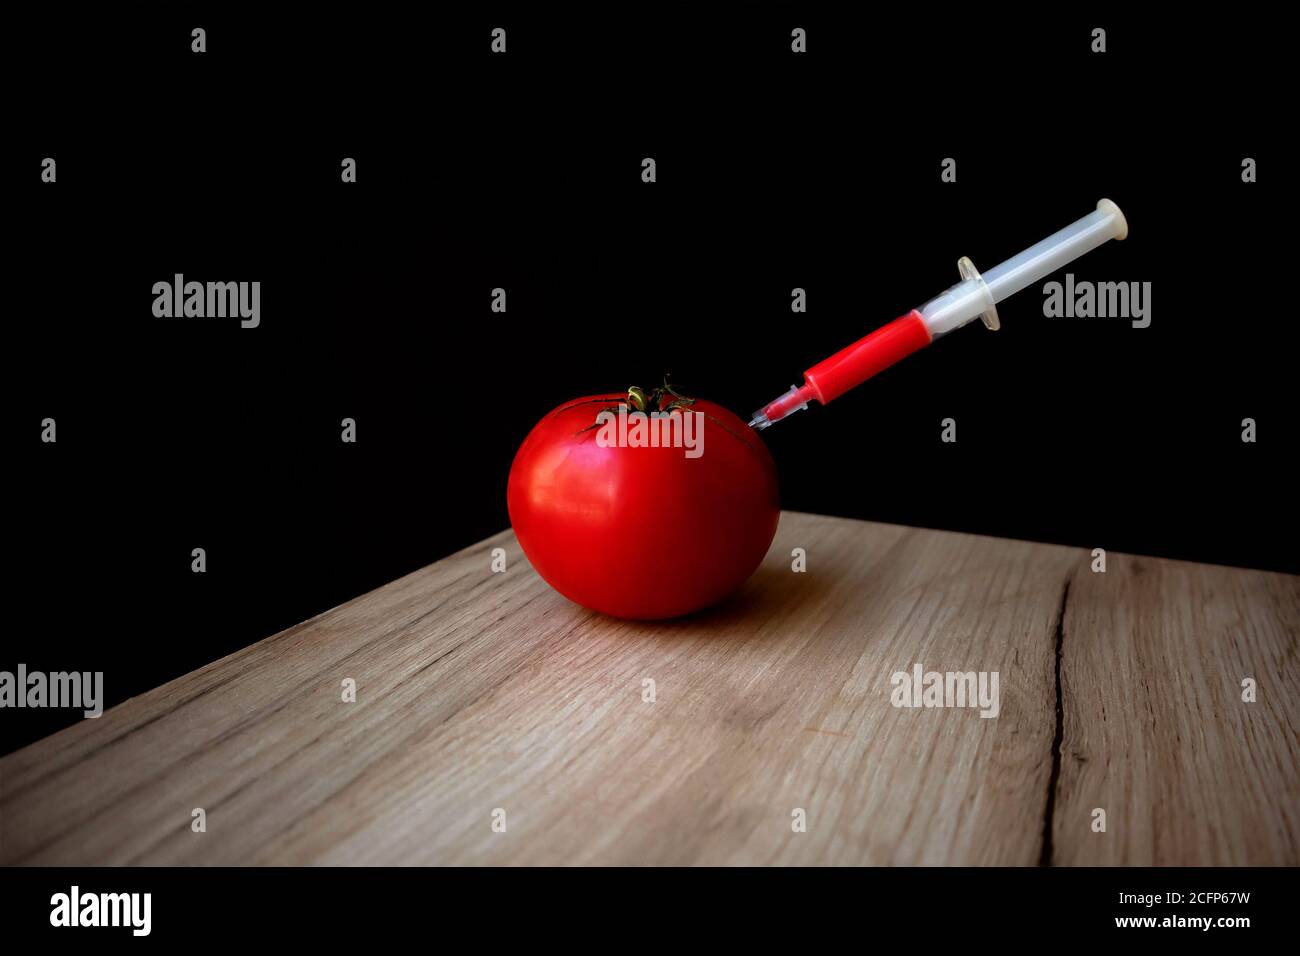 Ripe red tomato on a wooden board and syringe inside it extracting red liquid Stock Photo